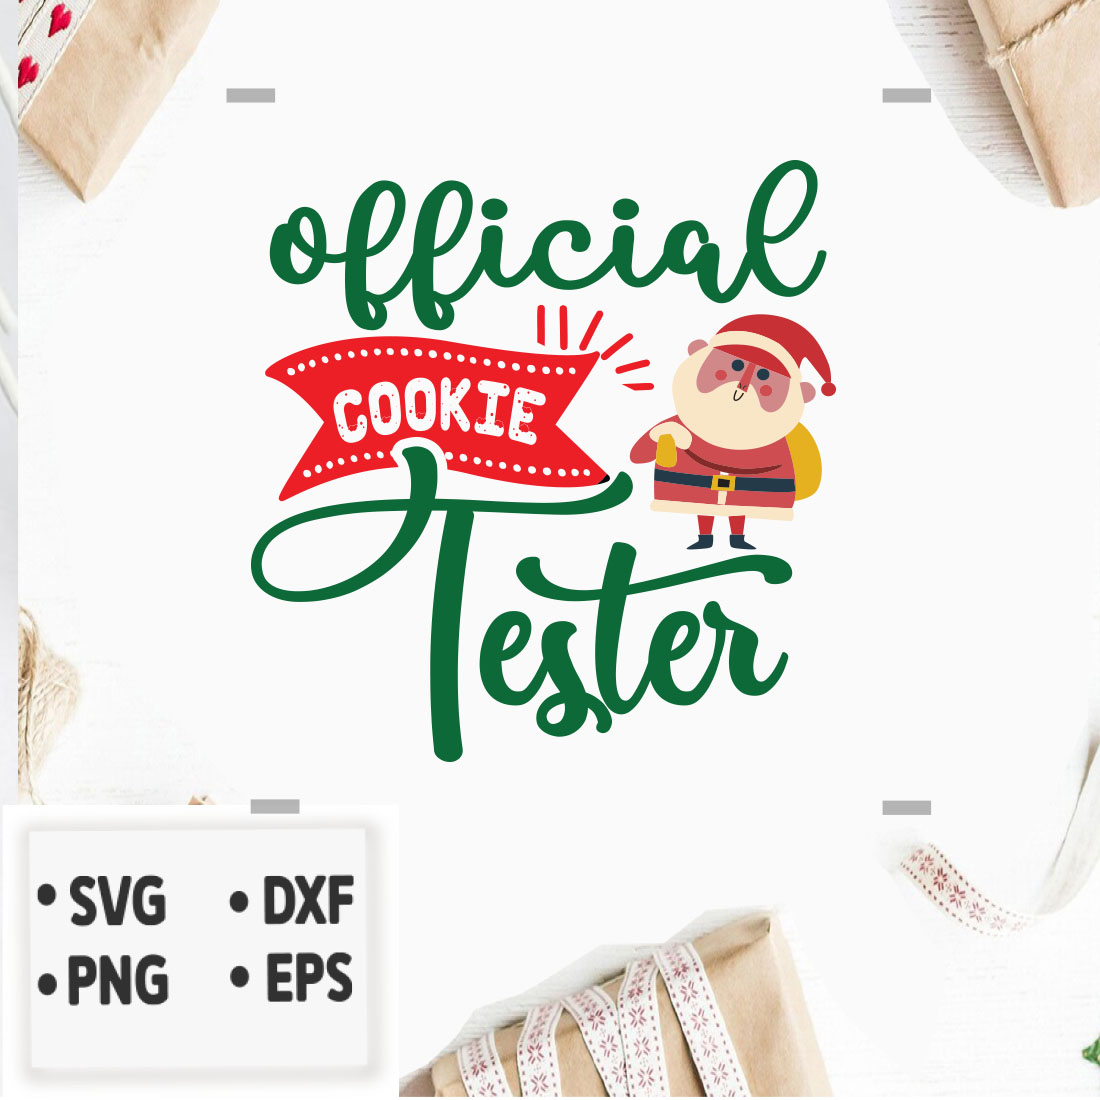 Image with amazing inscription Official cookie tester.